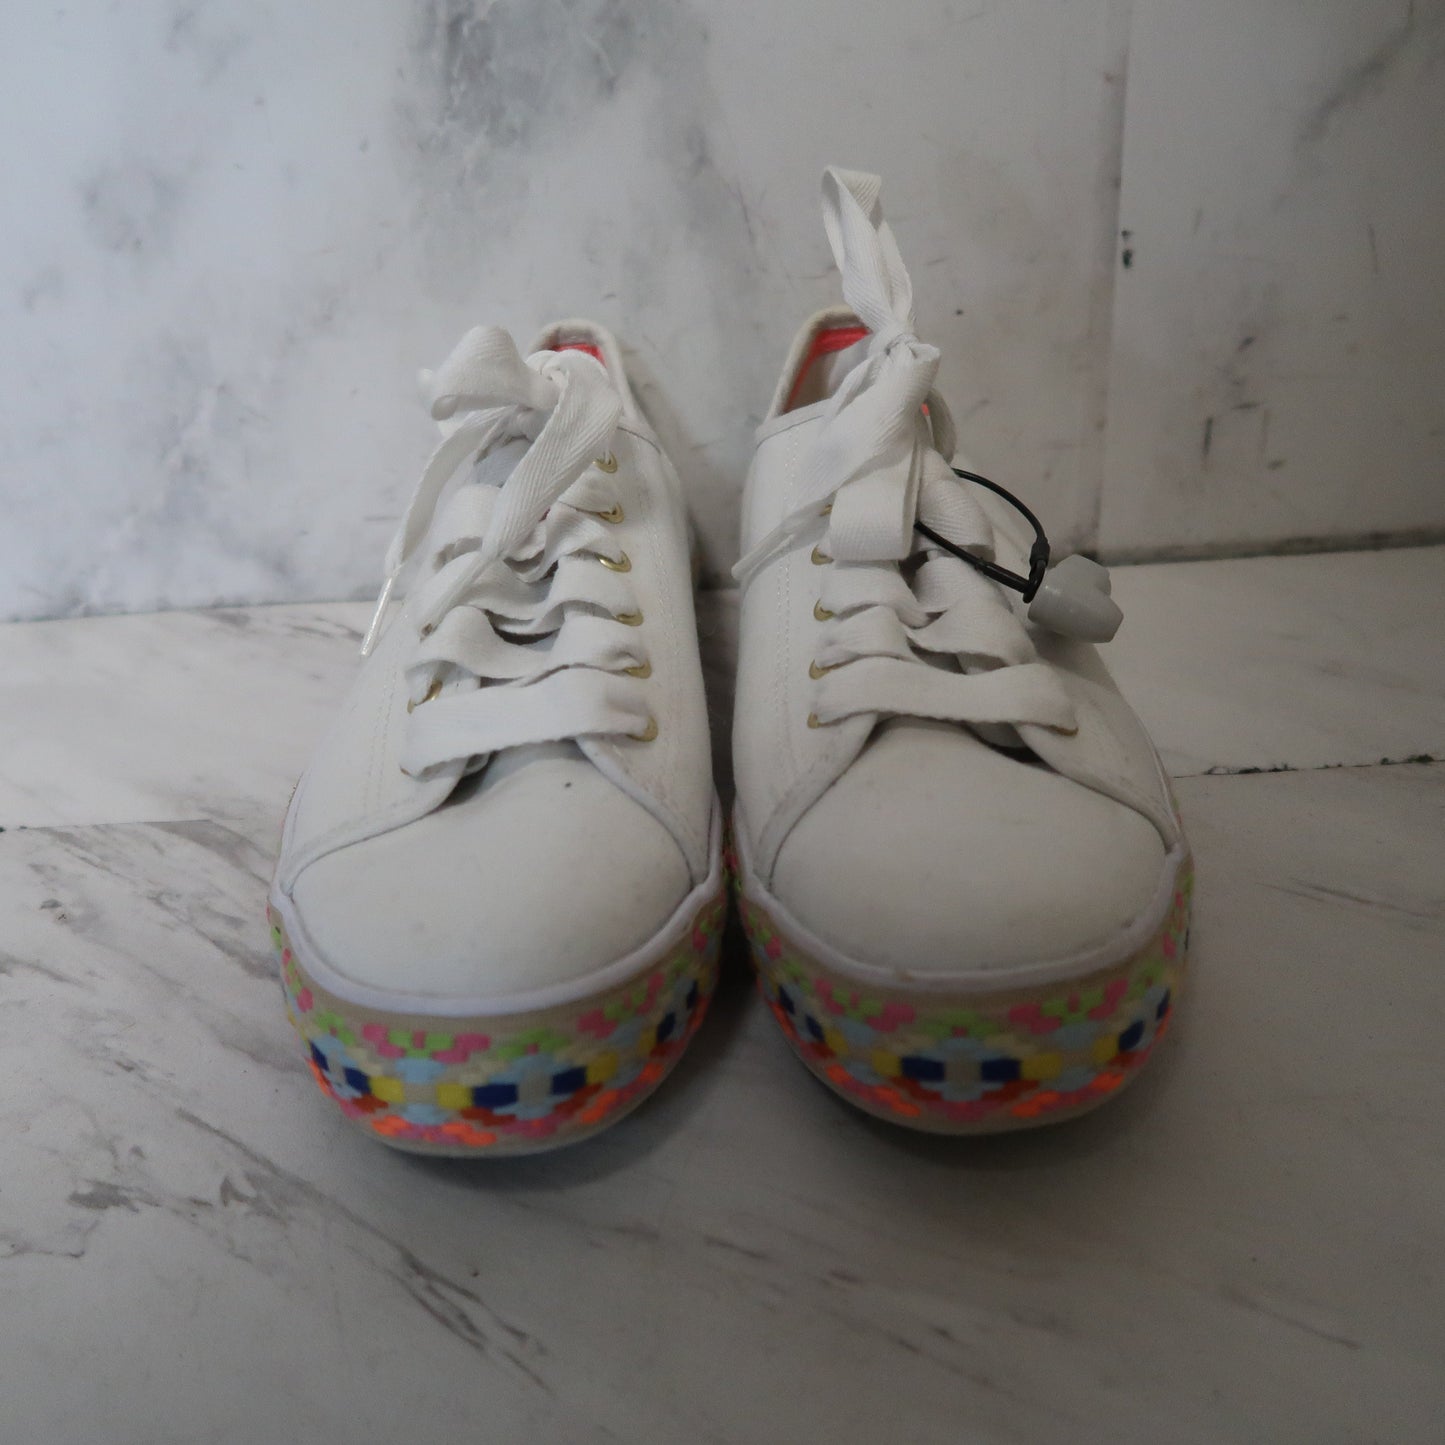 Shoes Flats Boat By Keds  Size: 9.5